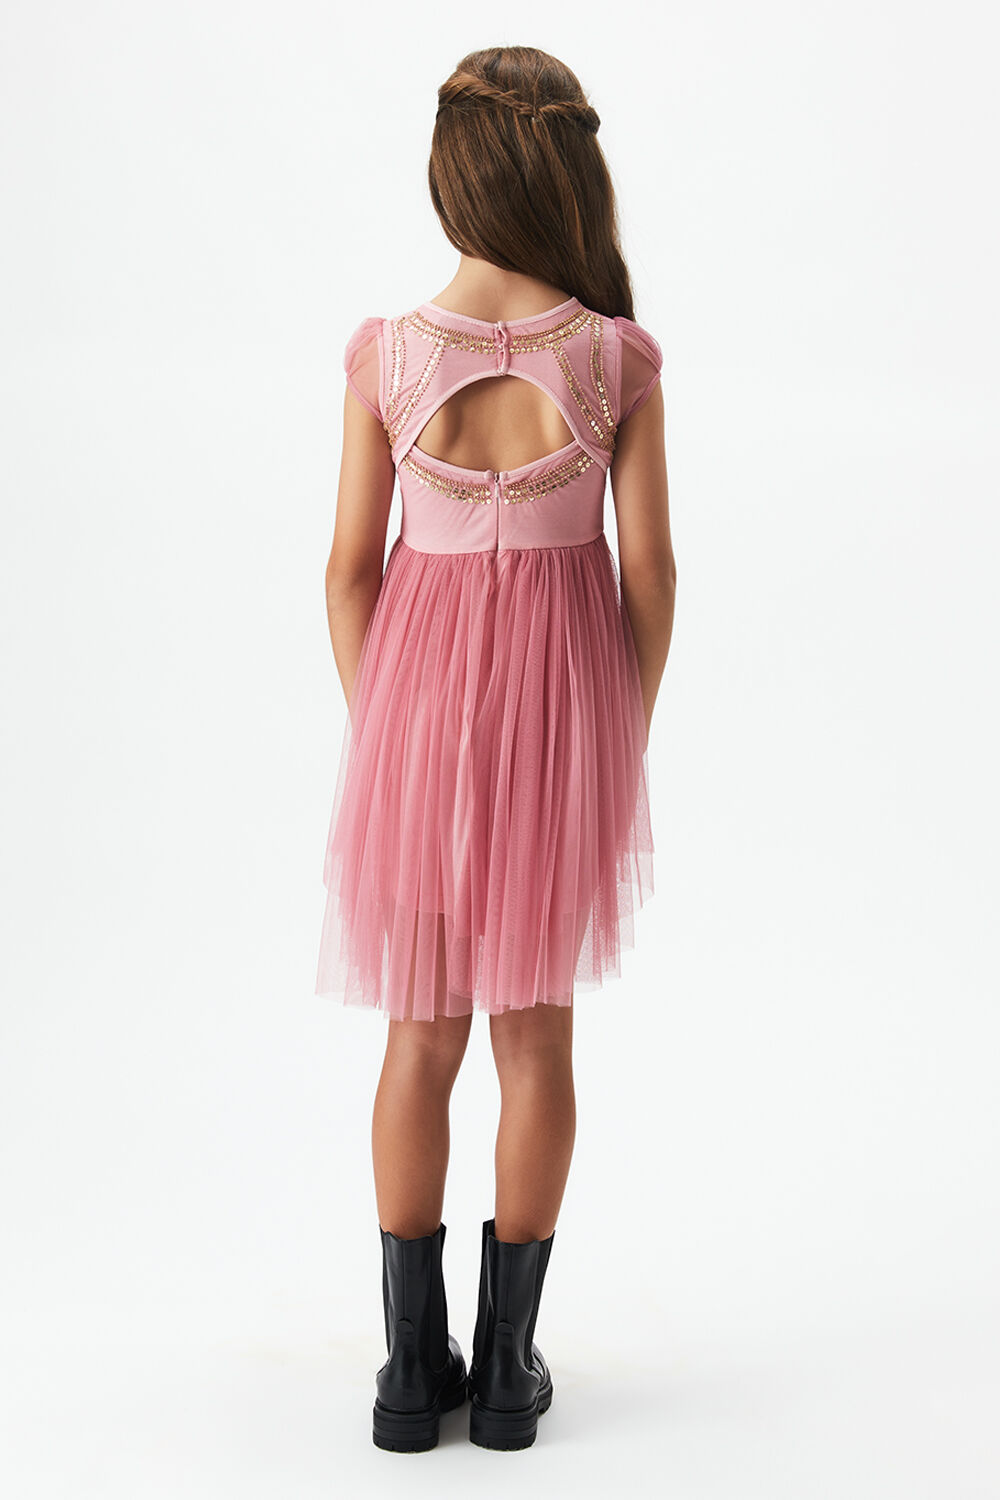 GIRLS TAYLOR SEQUIN DRESS in colour PETAL PINK